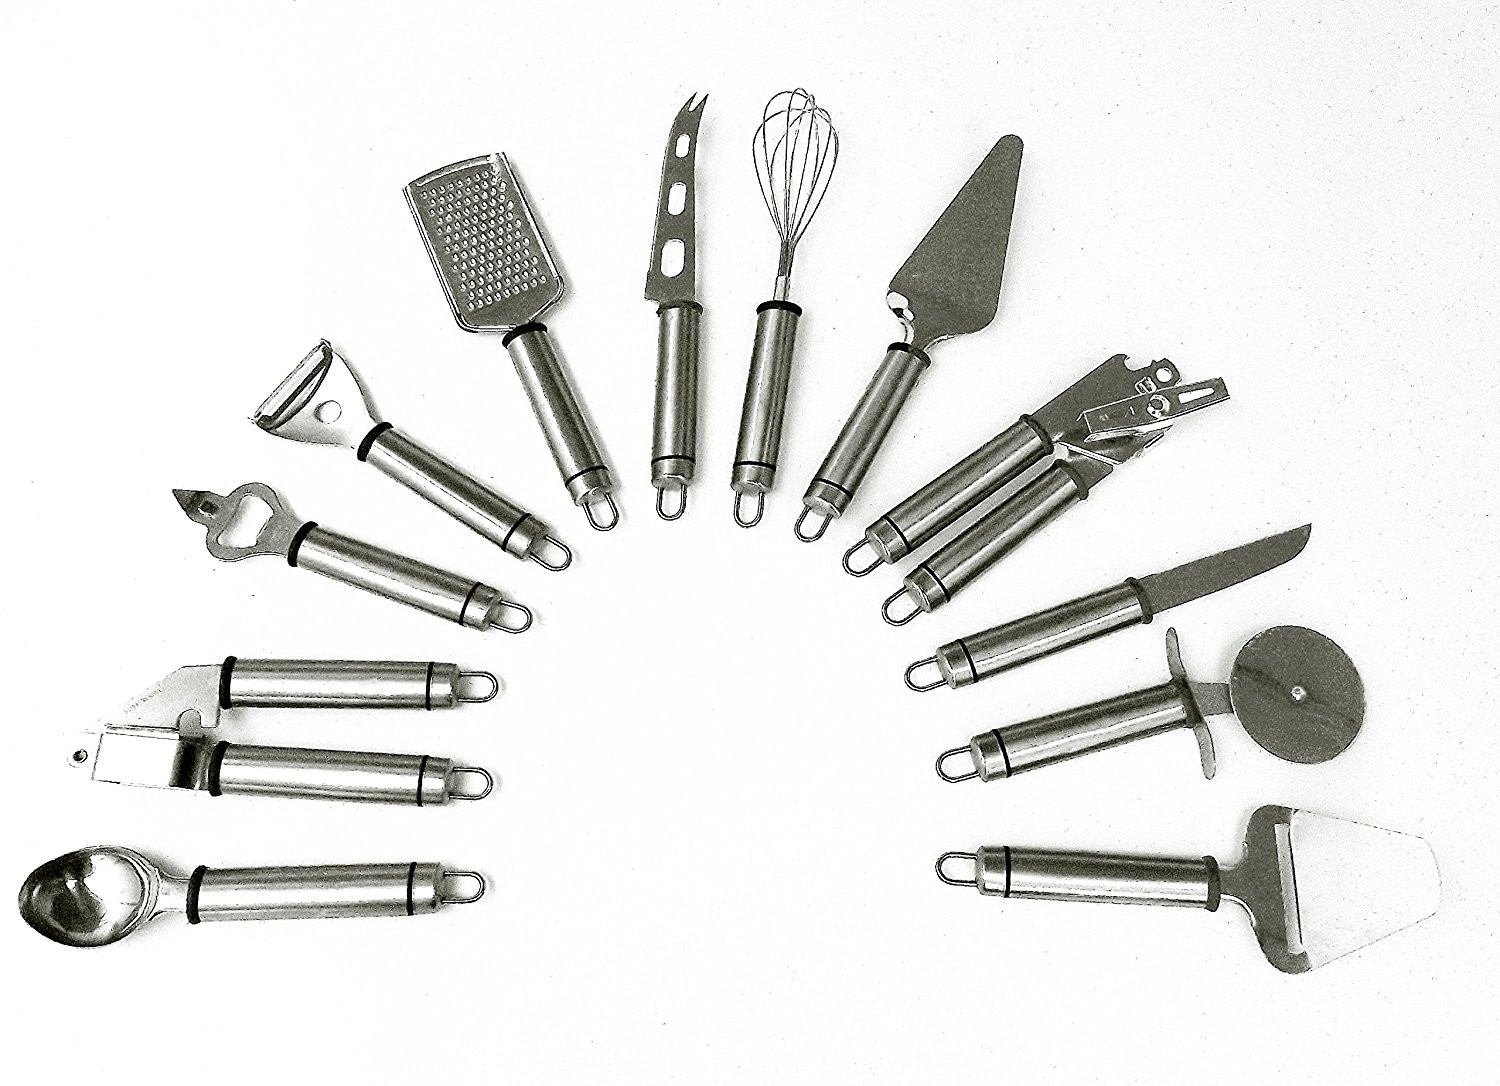 DELUXE KITCHEN GADGET TOOLS SET made with Food Grade 304 Stainless